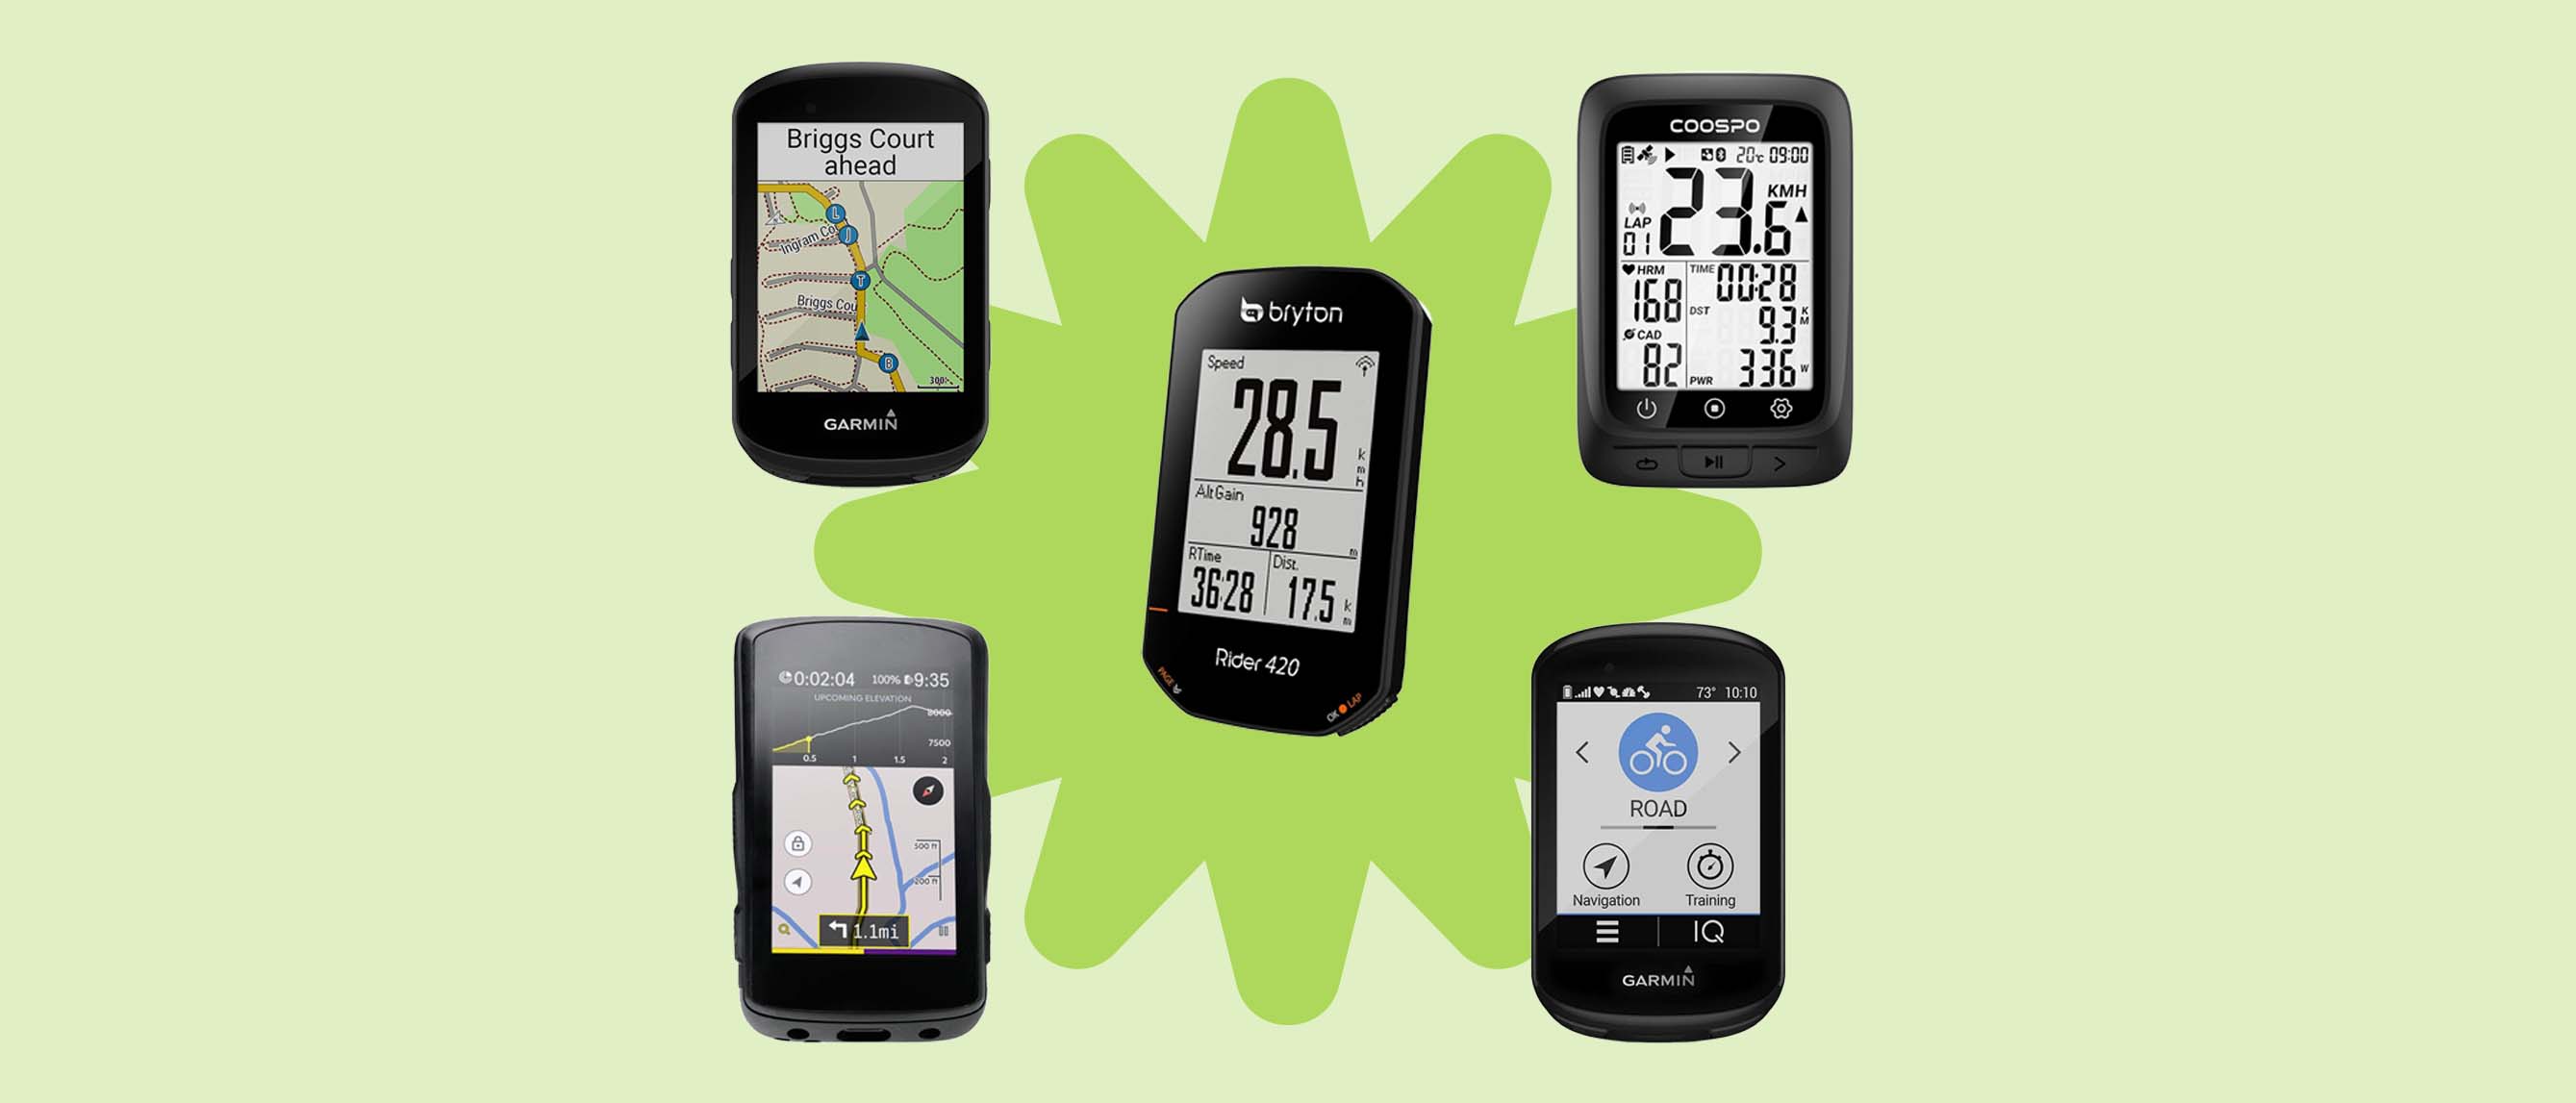 The Edge 530 is the Best Value Garmin GPS, But Should YOU Buy It? 